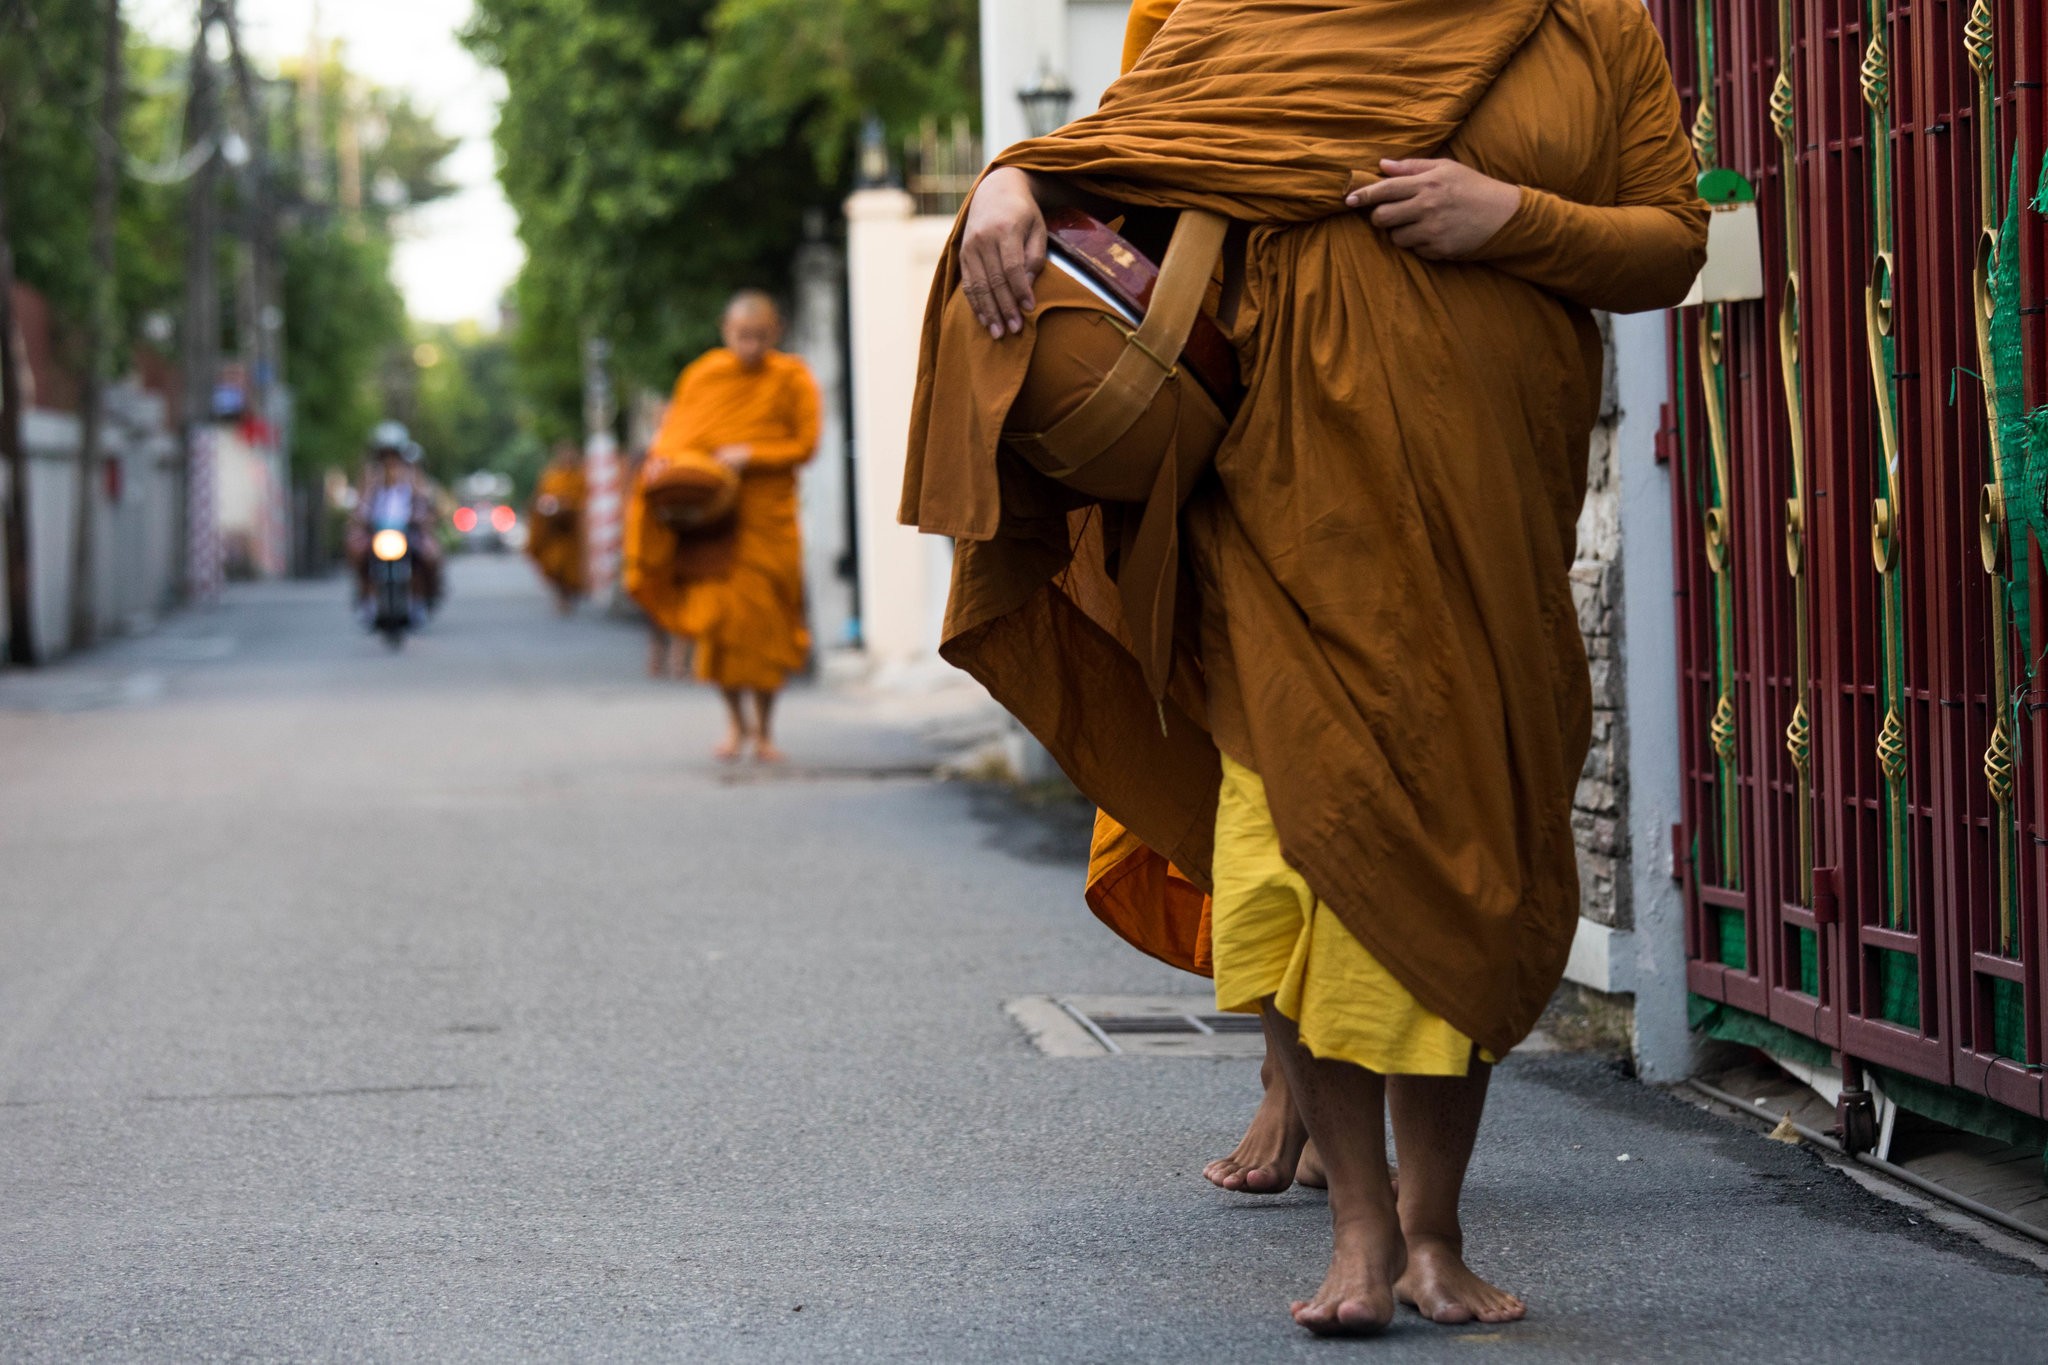 Buddhist monks collecting alms last month in Bangkok. Devotees’ abundant offerings of sugary or high-fat foods are contributing to a weight problem among monks.CreditCreditAmanda Mustard for The New York Times